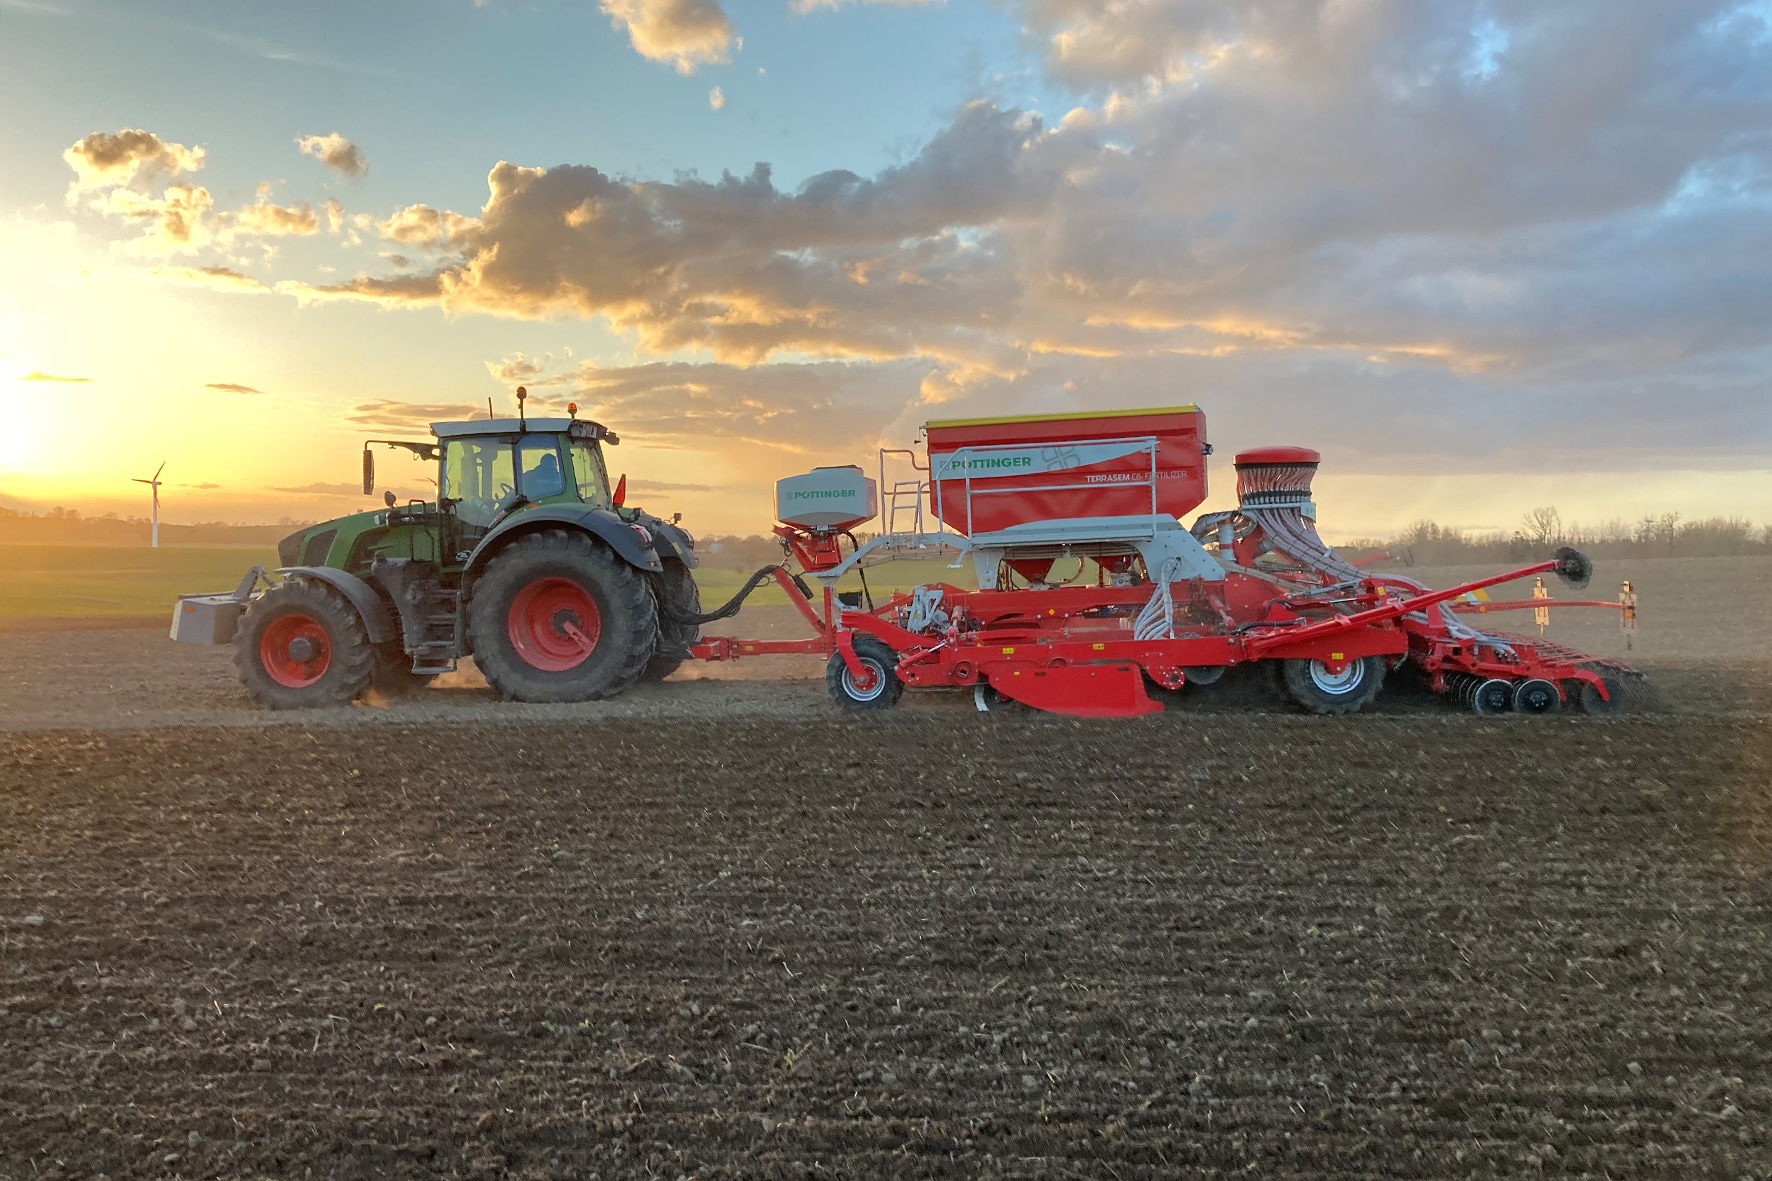 Using the cover crop sowing unit with a mulch seed drill